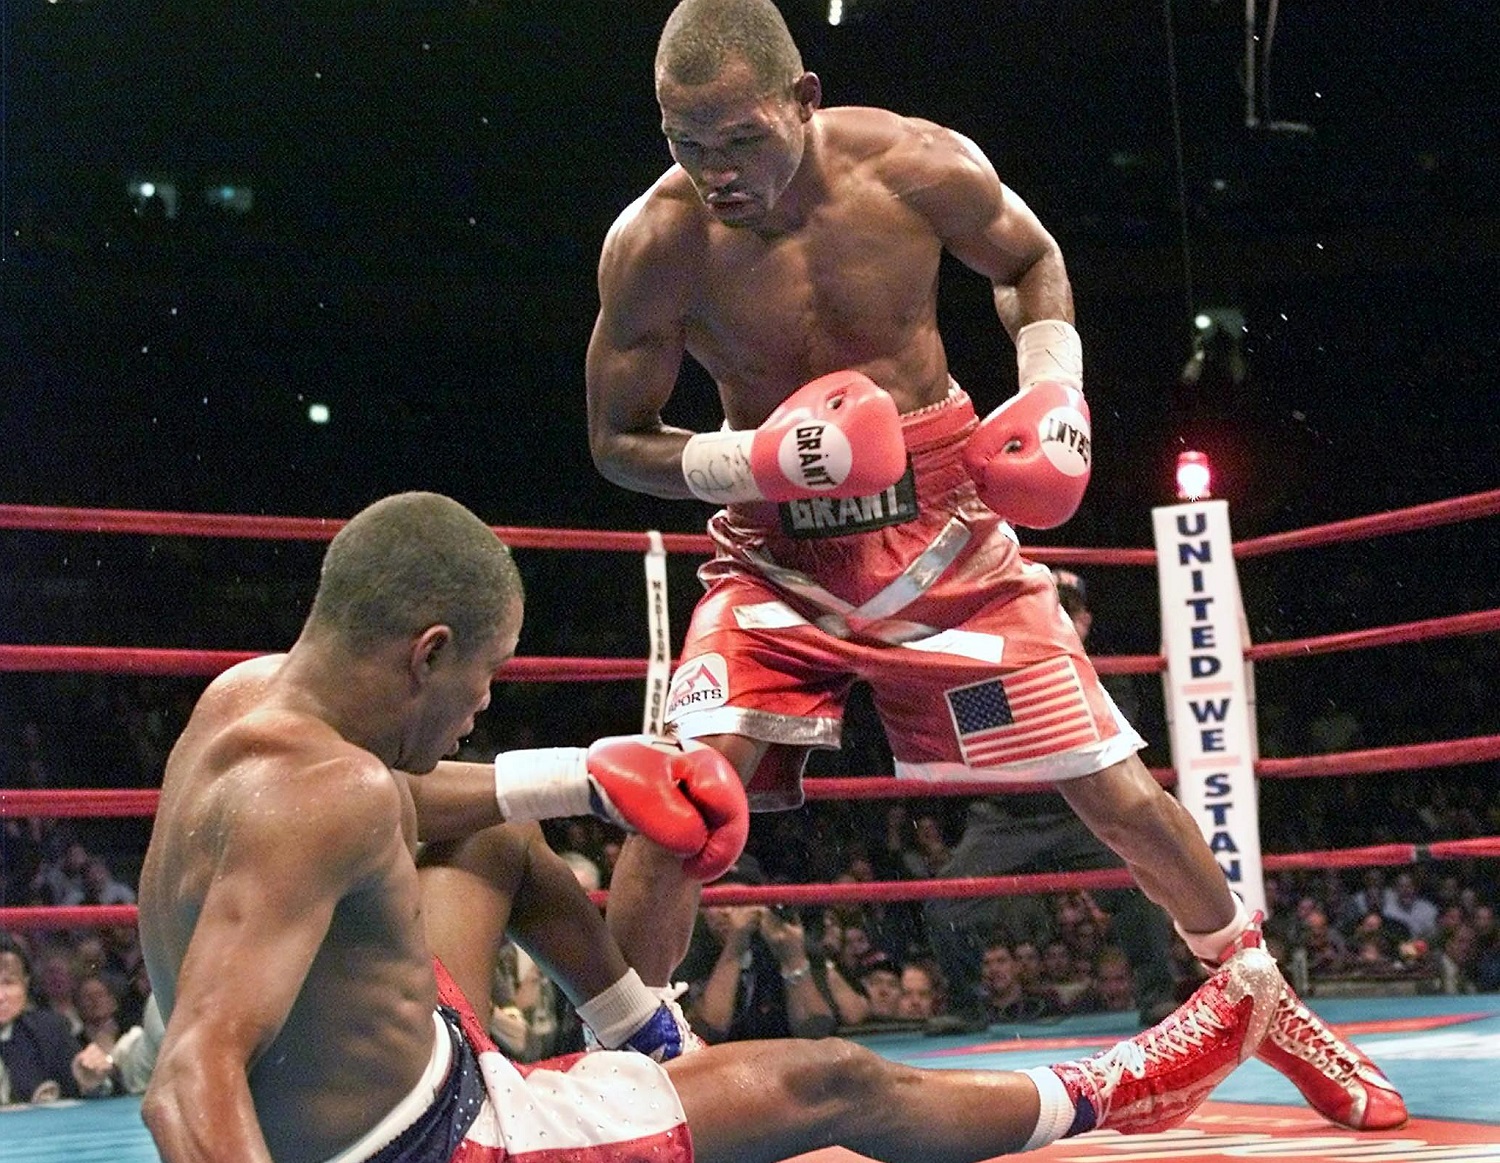 Bernard Hopkins scored a 12th-round TKO of Felix Trinidad in the top fight of 2001.